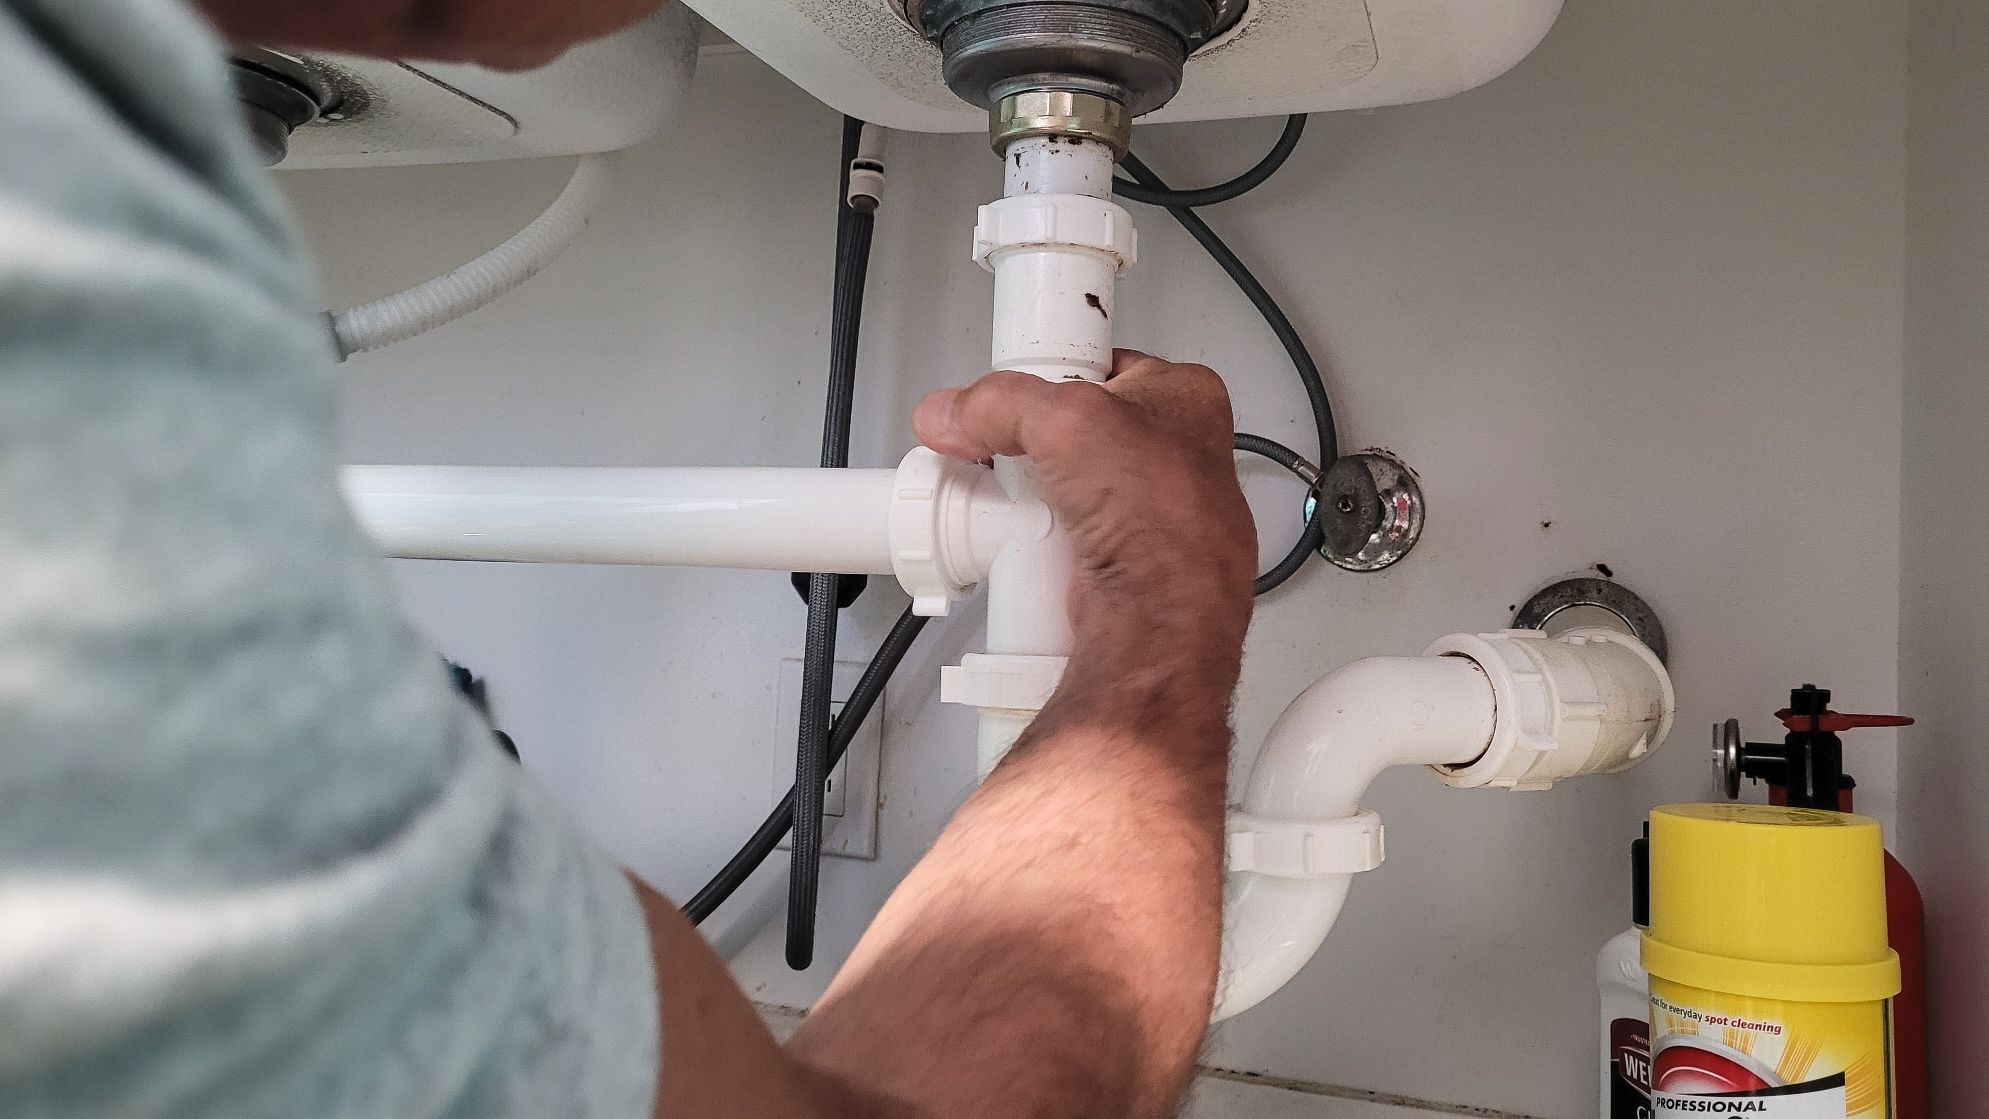 24/7 Plumbing Solutions: Reliable Help for Your Home